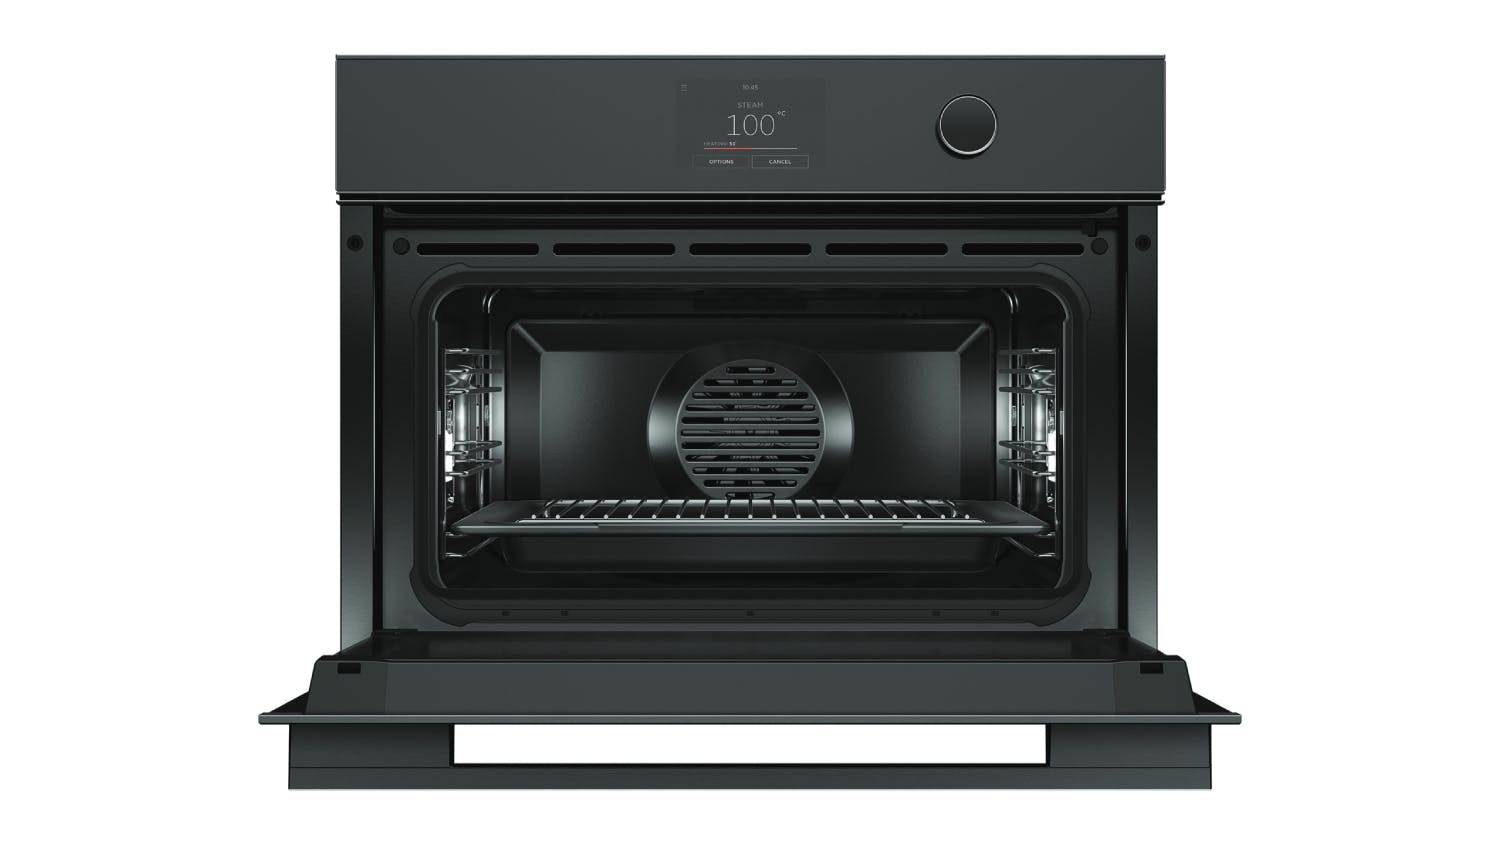 Fisher & Paykel 60cm Steam Clean 23 Function Built-In Compact Oven - Black Glass (Series 9/OS60NMTDB1)